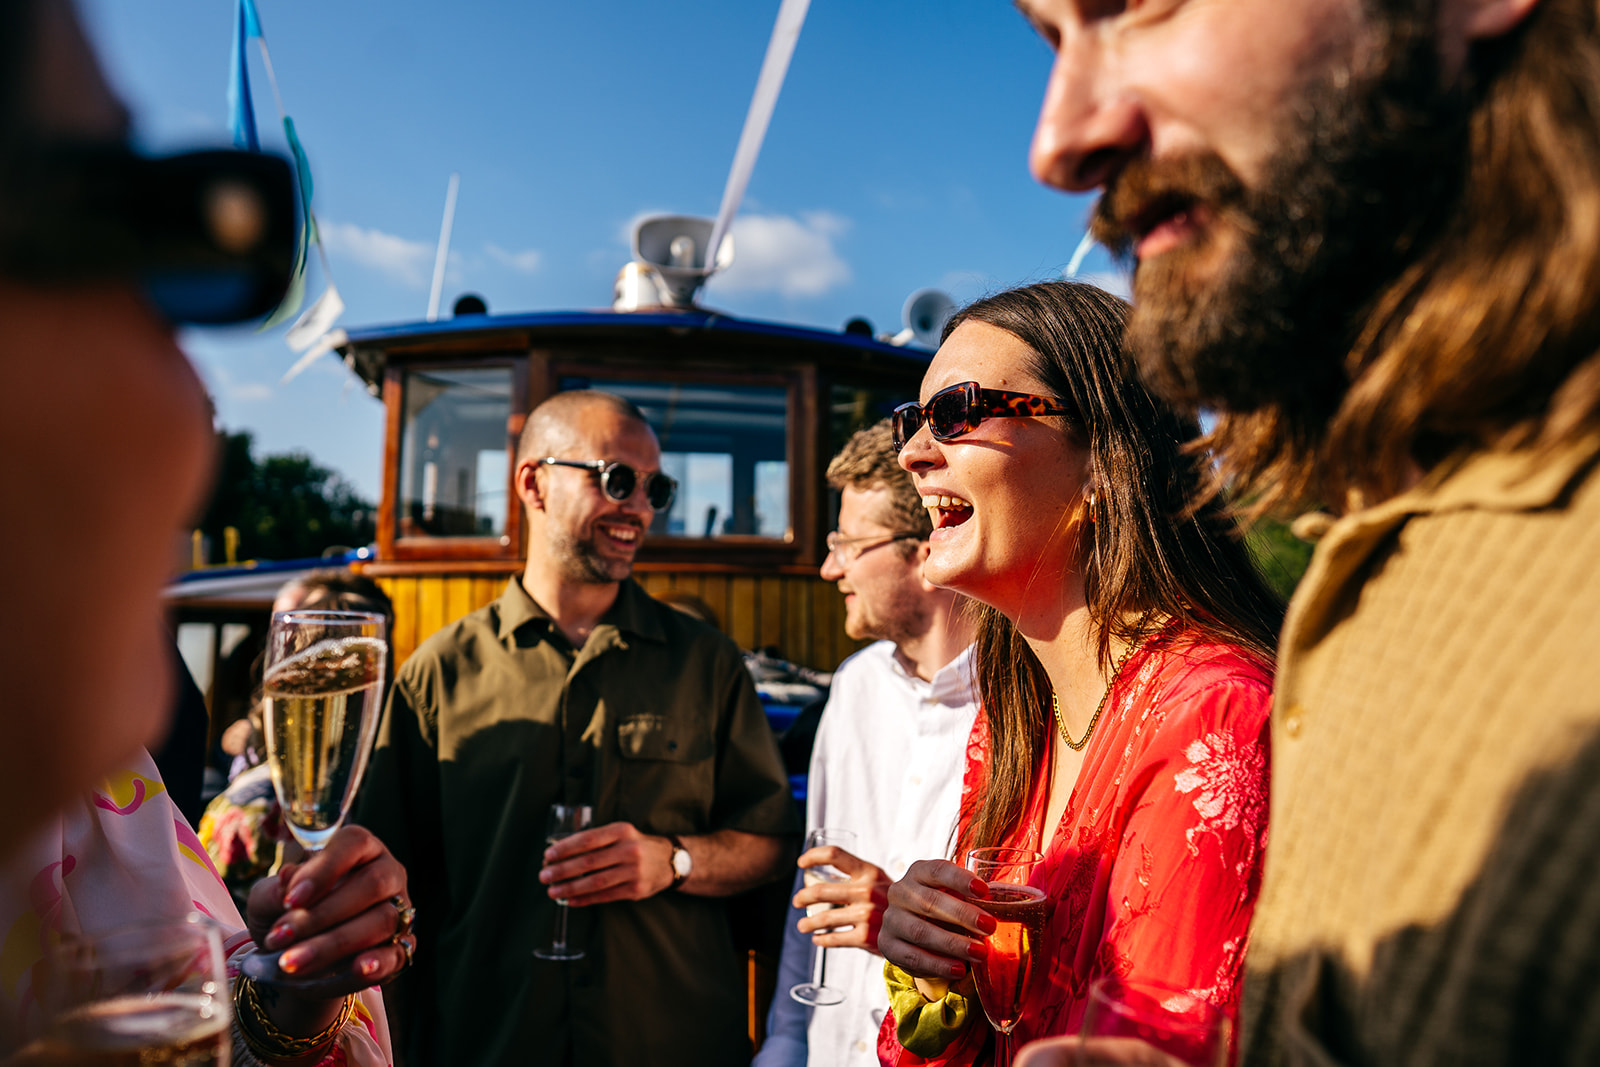 Guests laughing and sharing drinks and chat aboard boat at London Wedding.